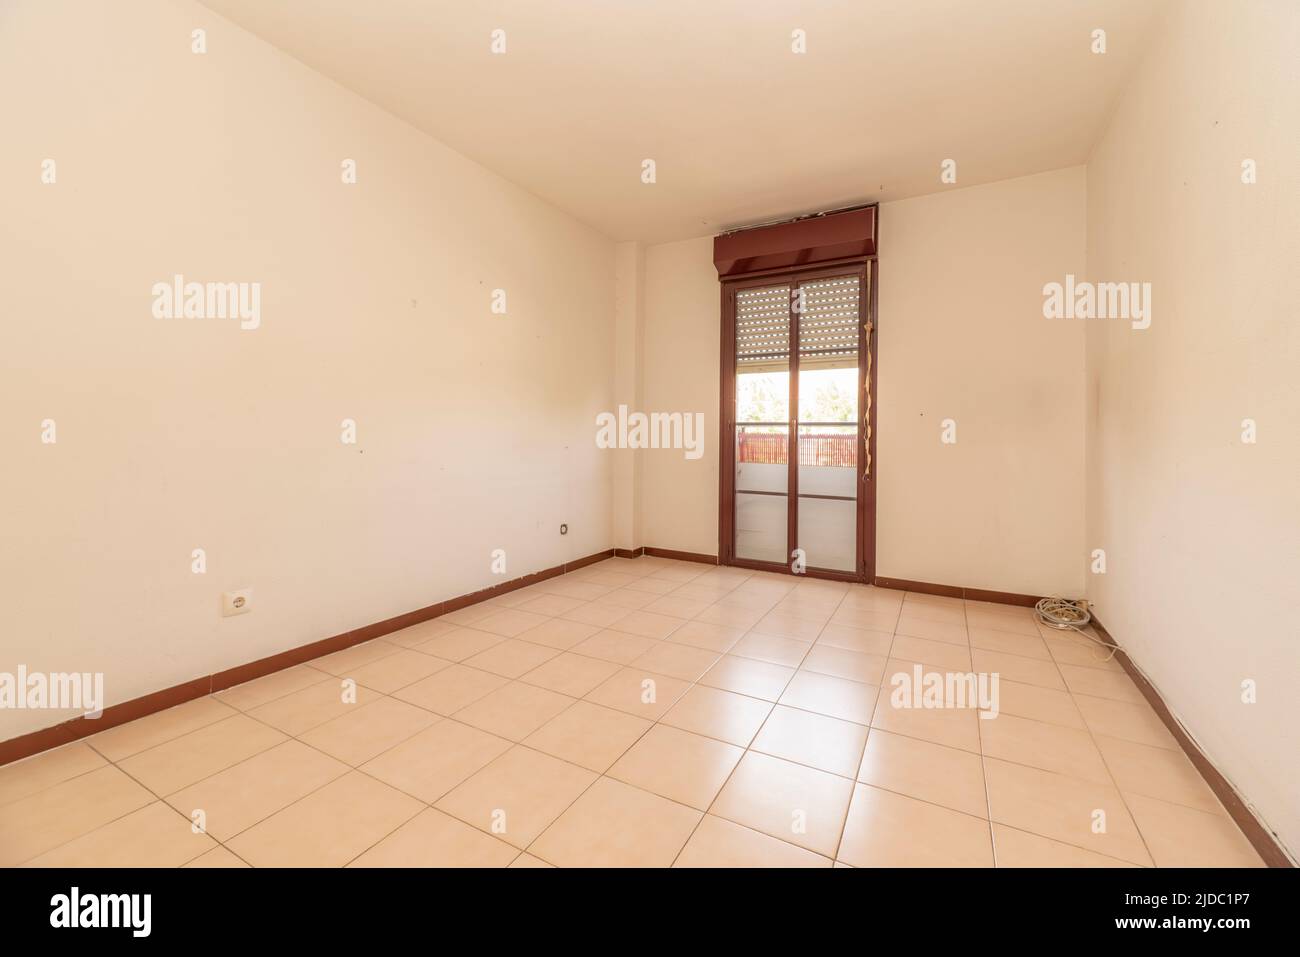 Empty room with plain white painted walls, ceramic tiled floor and reddish aluminum joinery on balcony doors Stock Photo